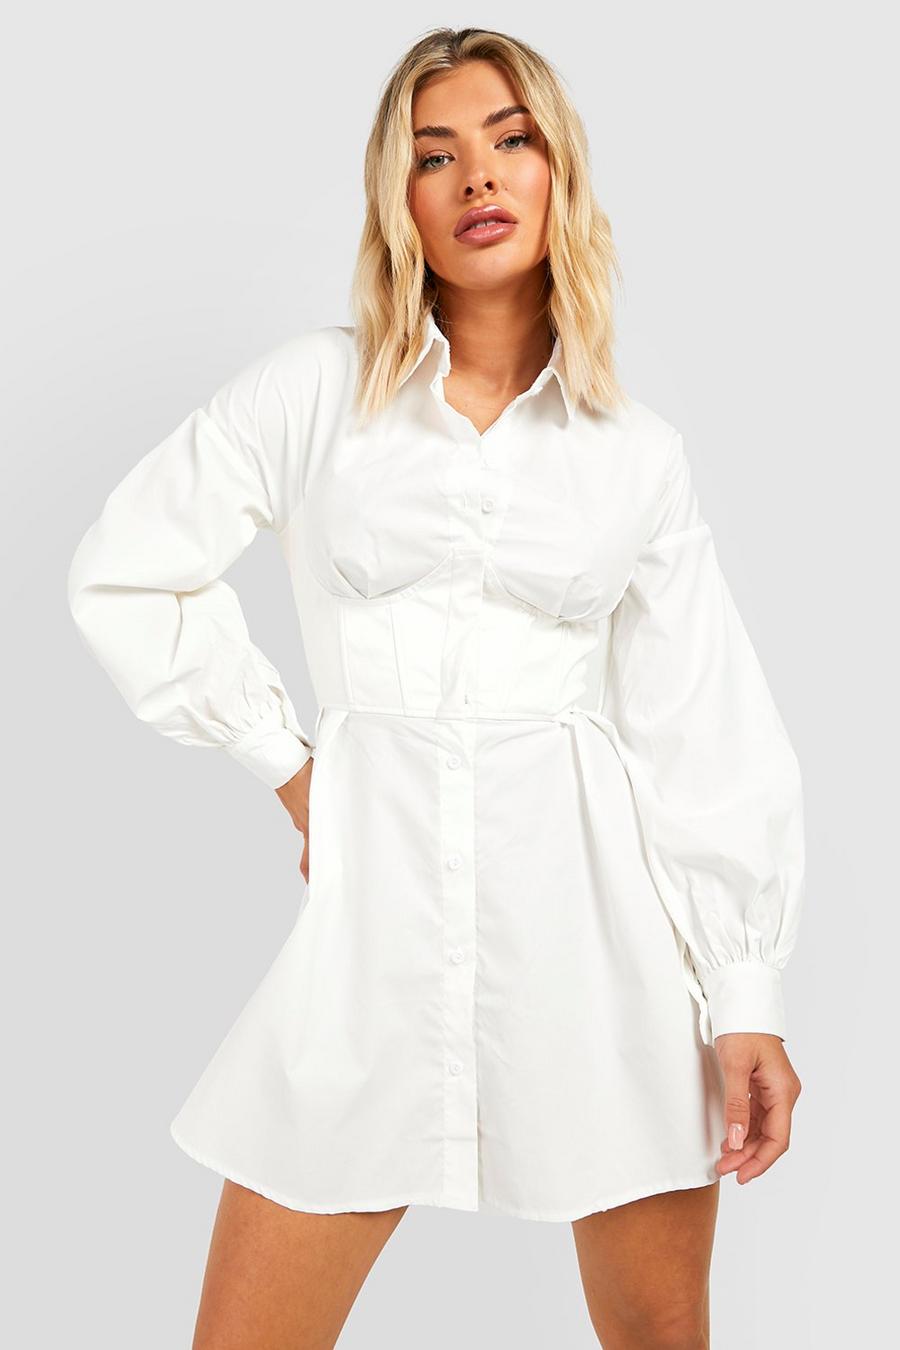 Ivory white Shirt Dress With Leather Look Corset